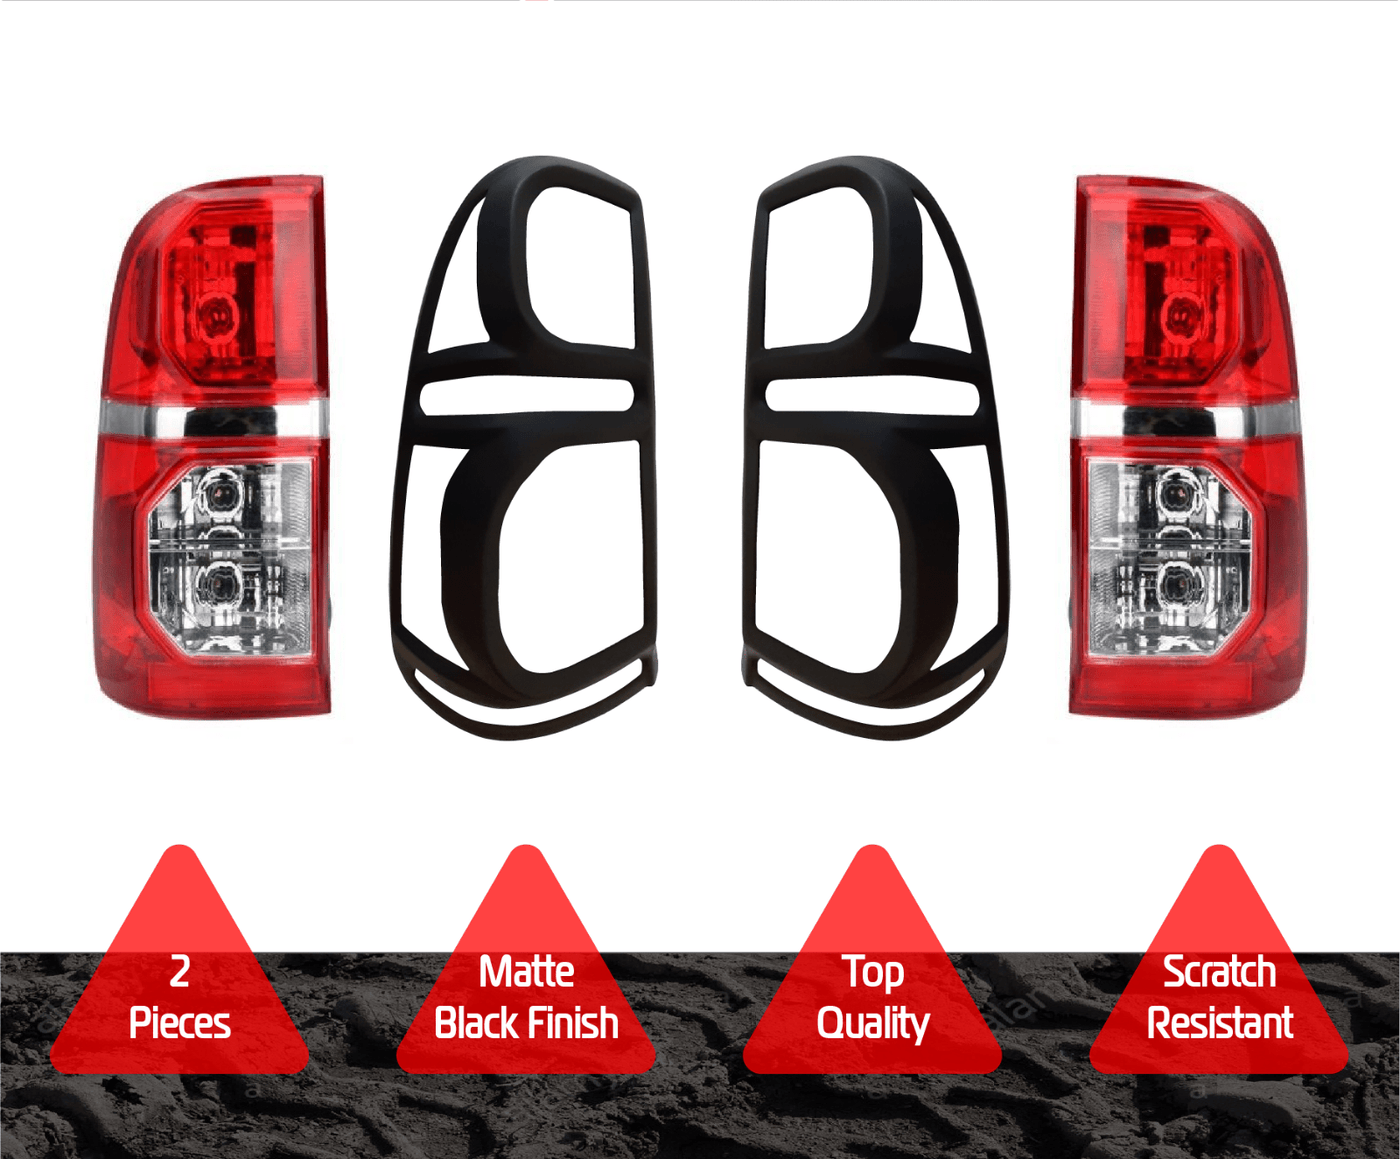 Tail Light Cover Protector 2 pcs Compatible with Toyota Hilux SR SR5 2012-2015 Model